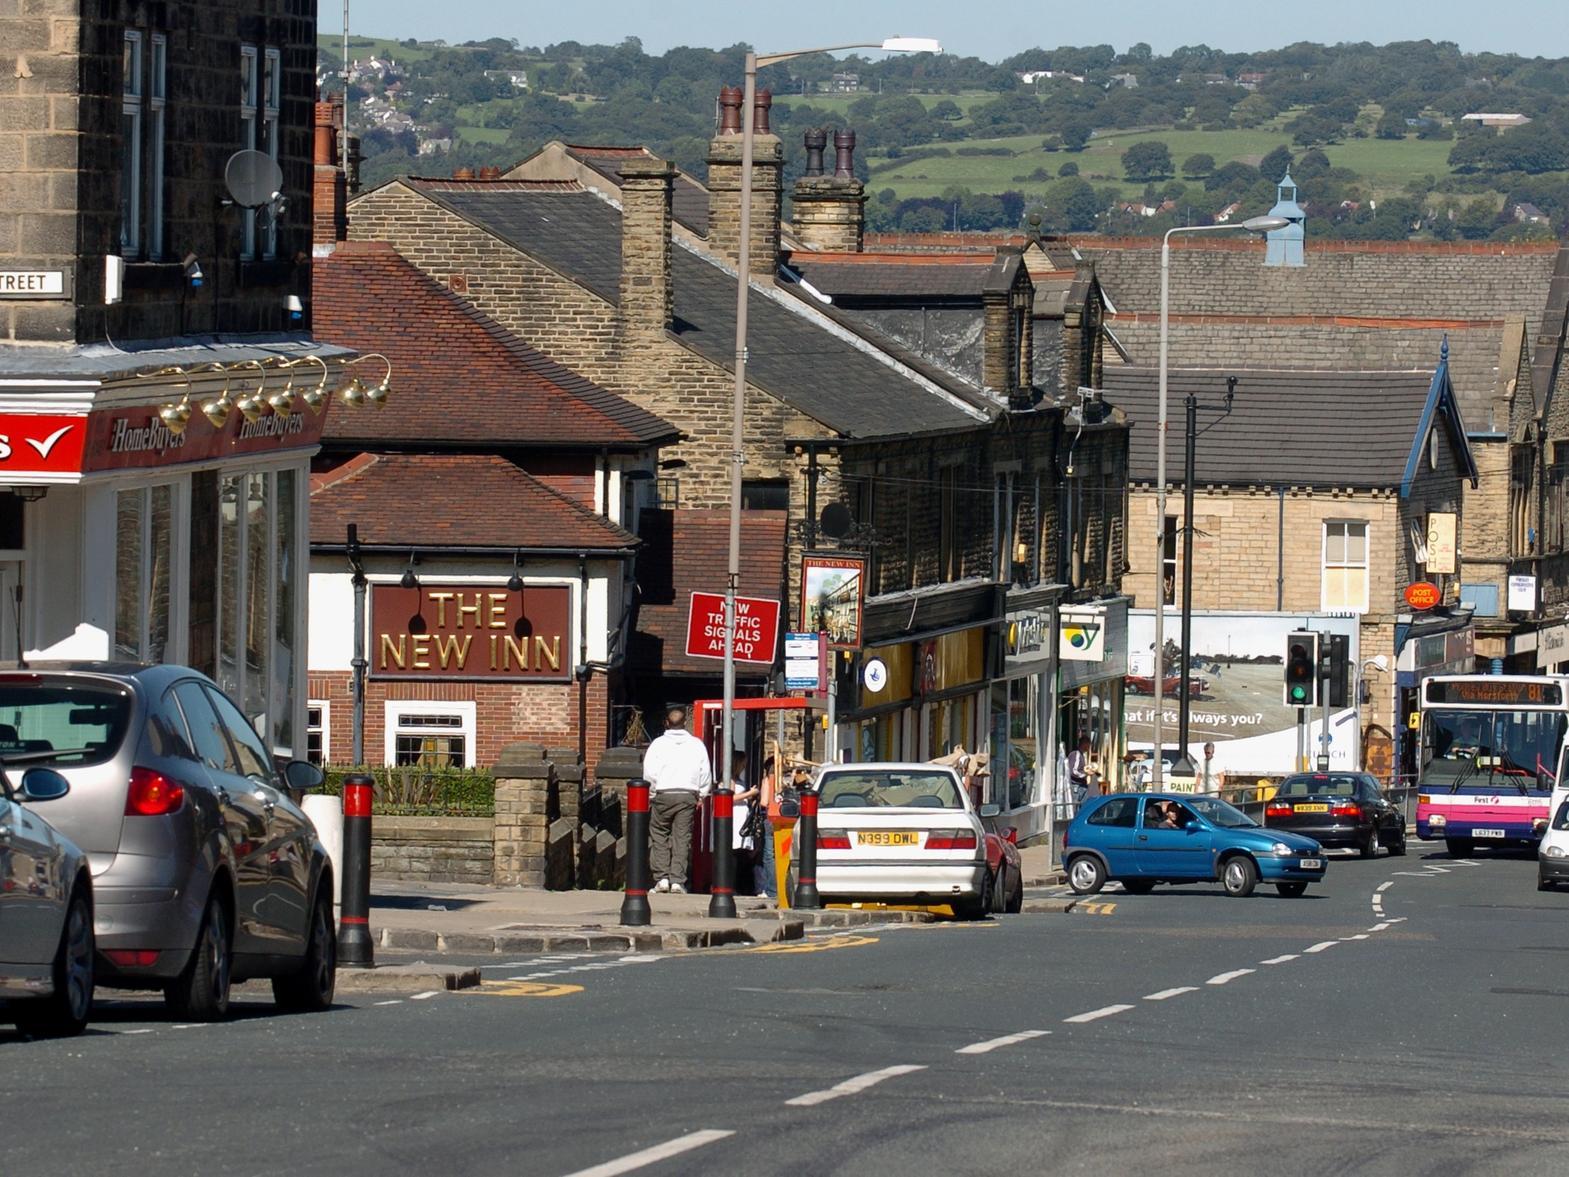 Share your memories of life in Farsley with Andrew Hutchinson via email at: andrew.hutchinson@jpress.co.uk or tweet him @AndyHutchYPN